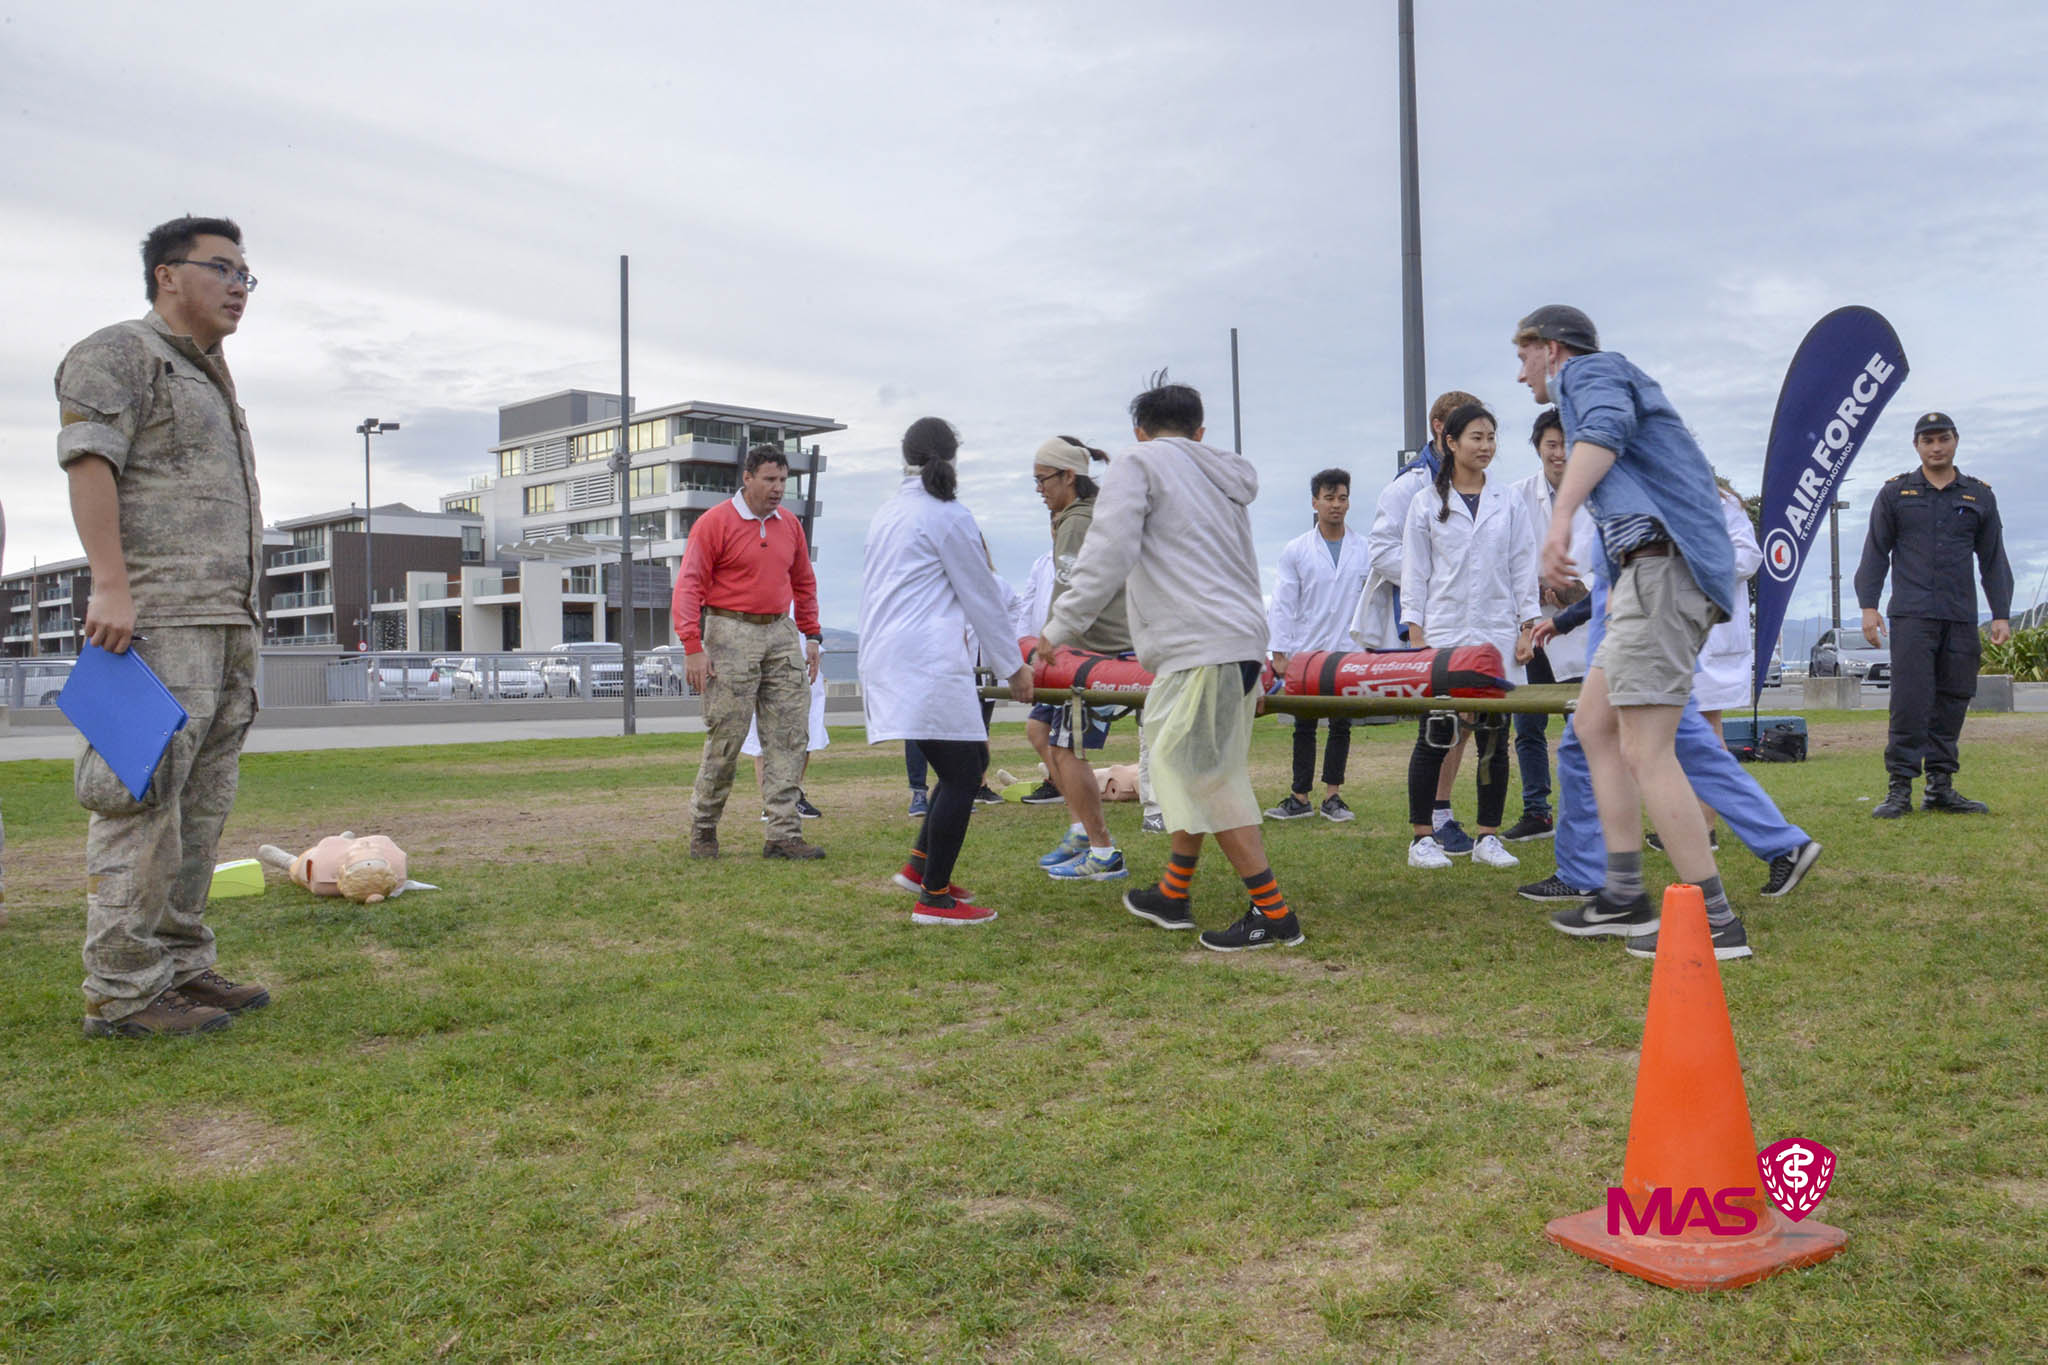 NZ Medical students teams outdoors rescue stretcher